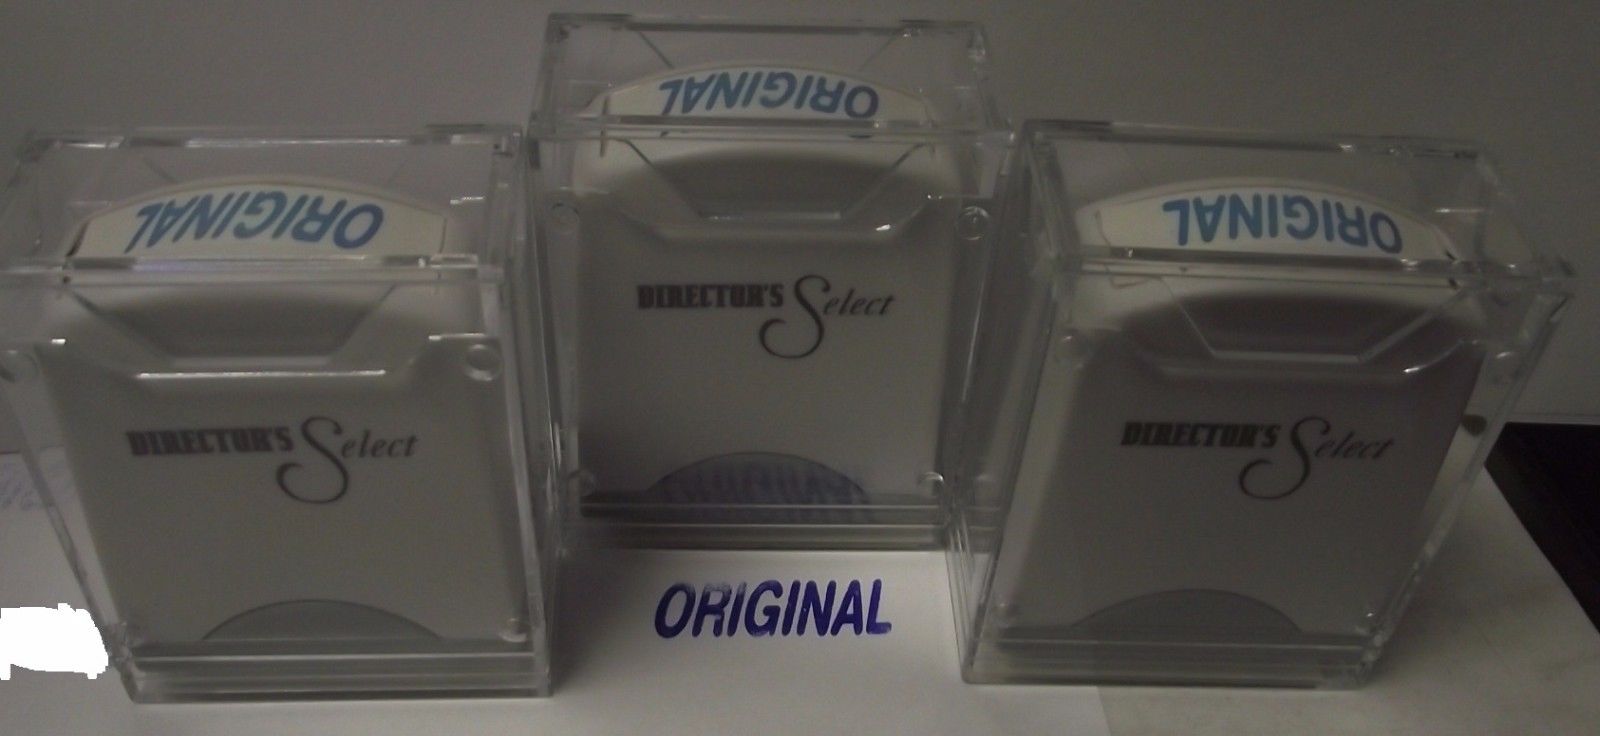 Global AGI-SS02025 Rectangle Stock Pre-Inked Rubber Stamp With "ORIGINAL" 3pcs.